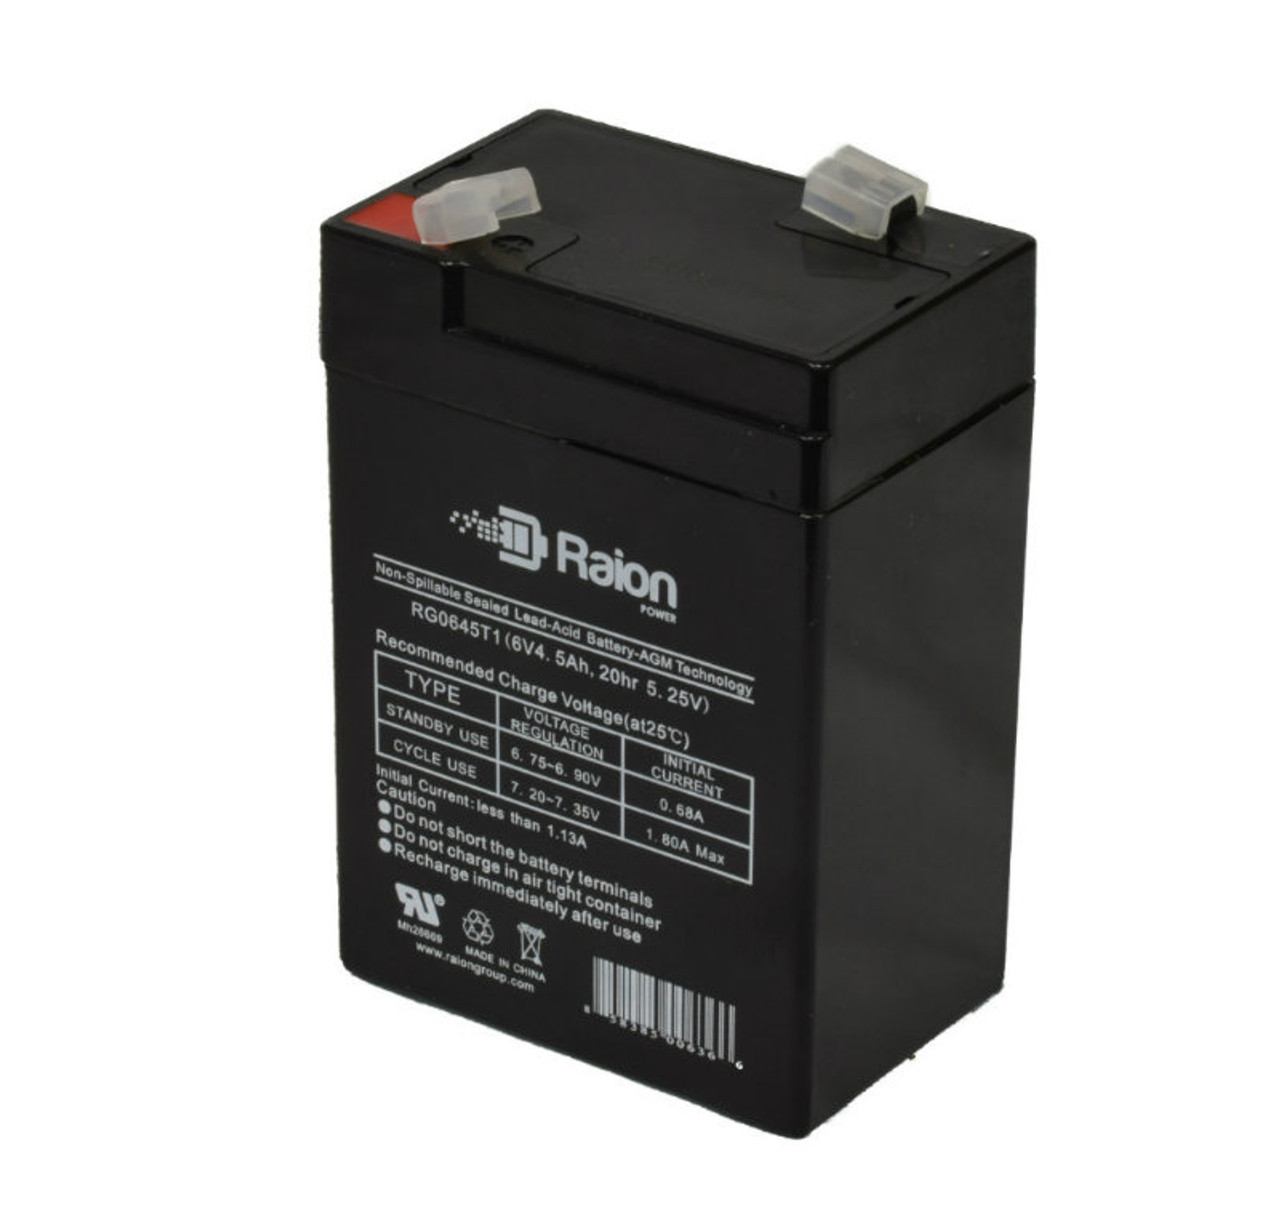 Raion Power RG0645T1 6V 4.5Ah Replacement Battery Cartridge for Champion NP5-6